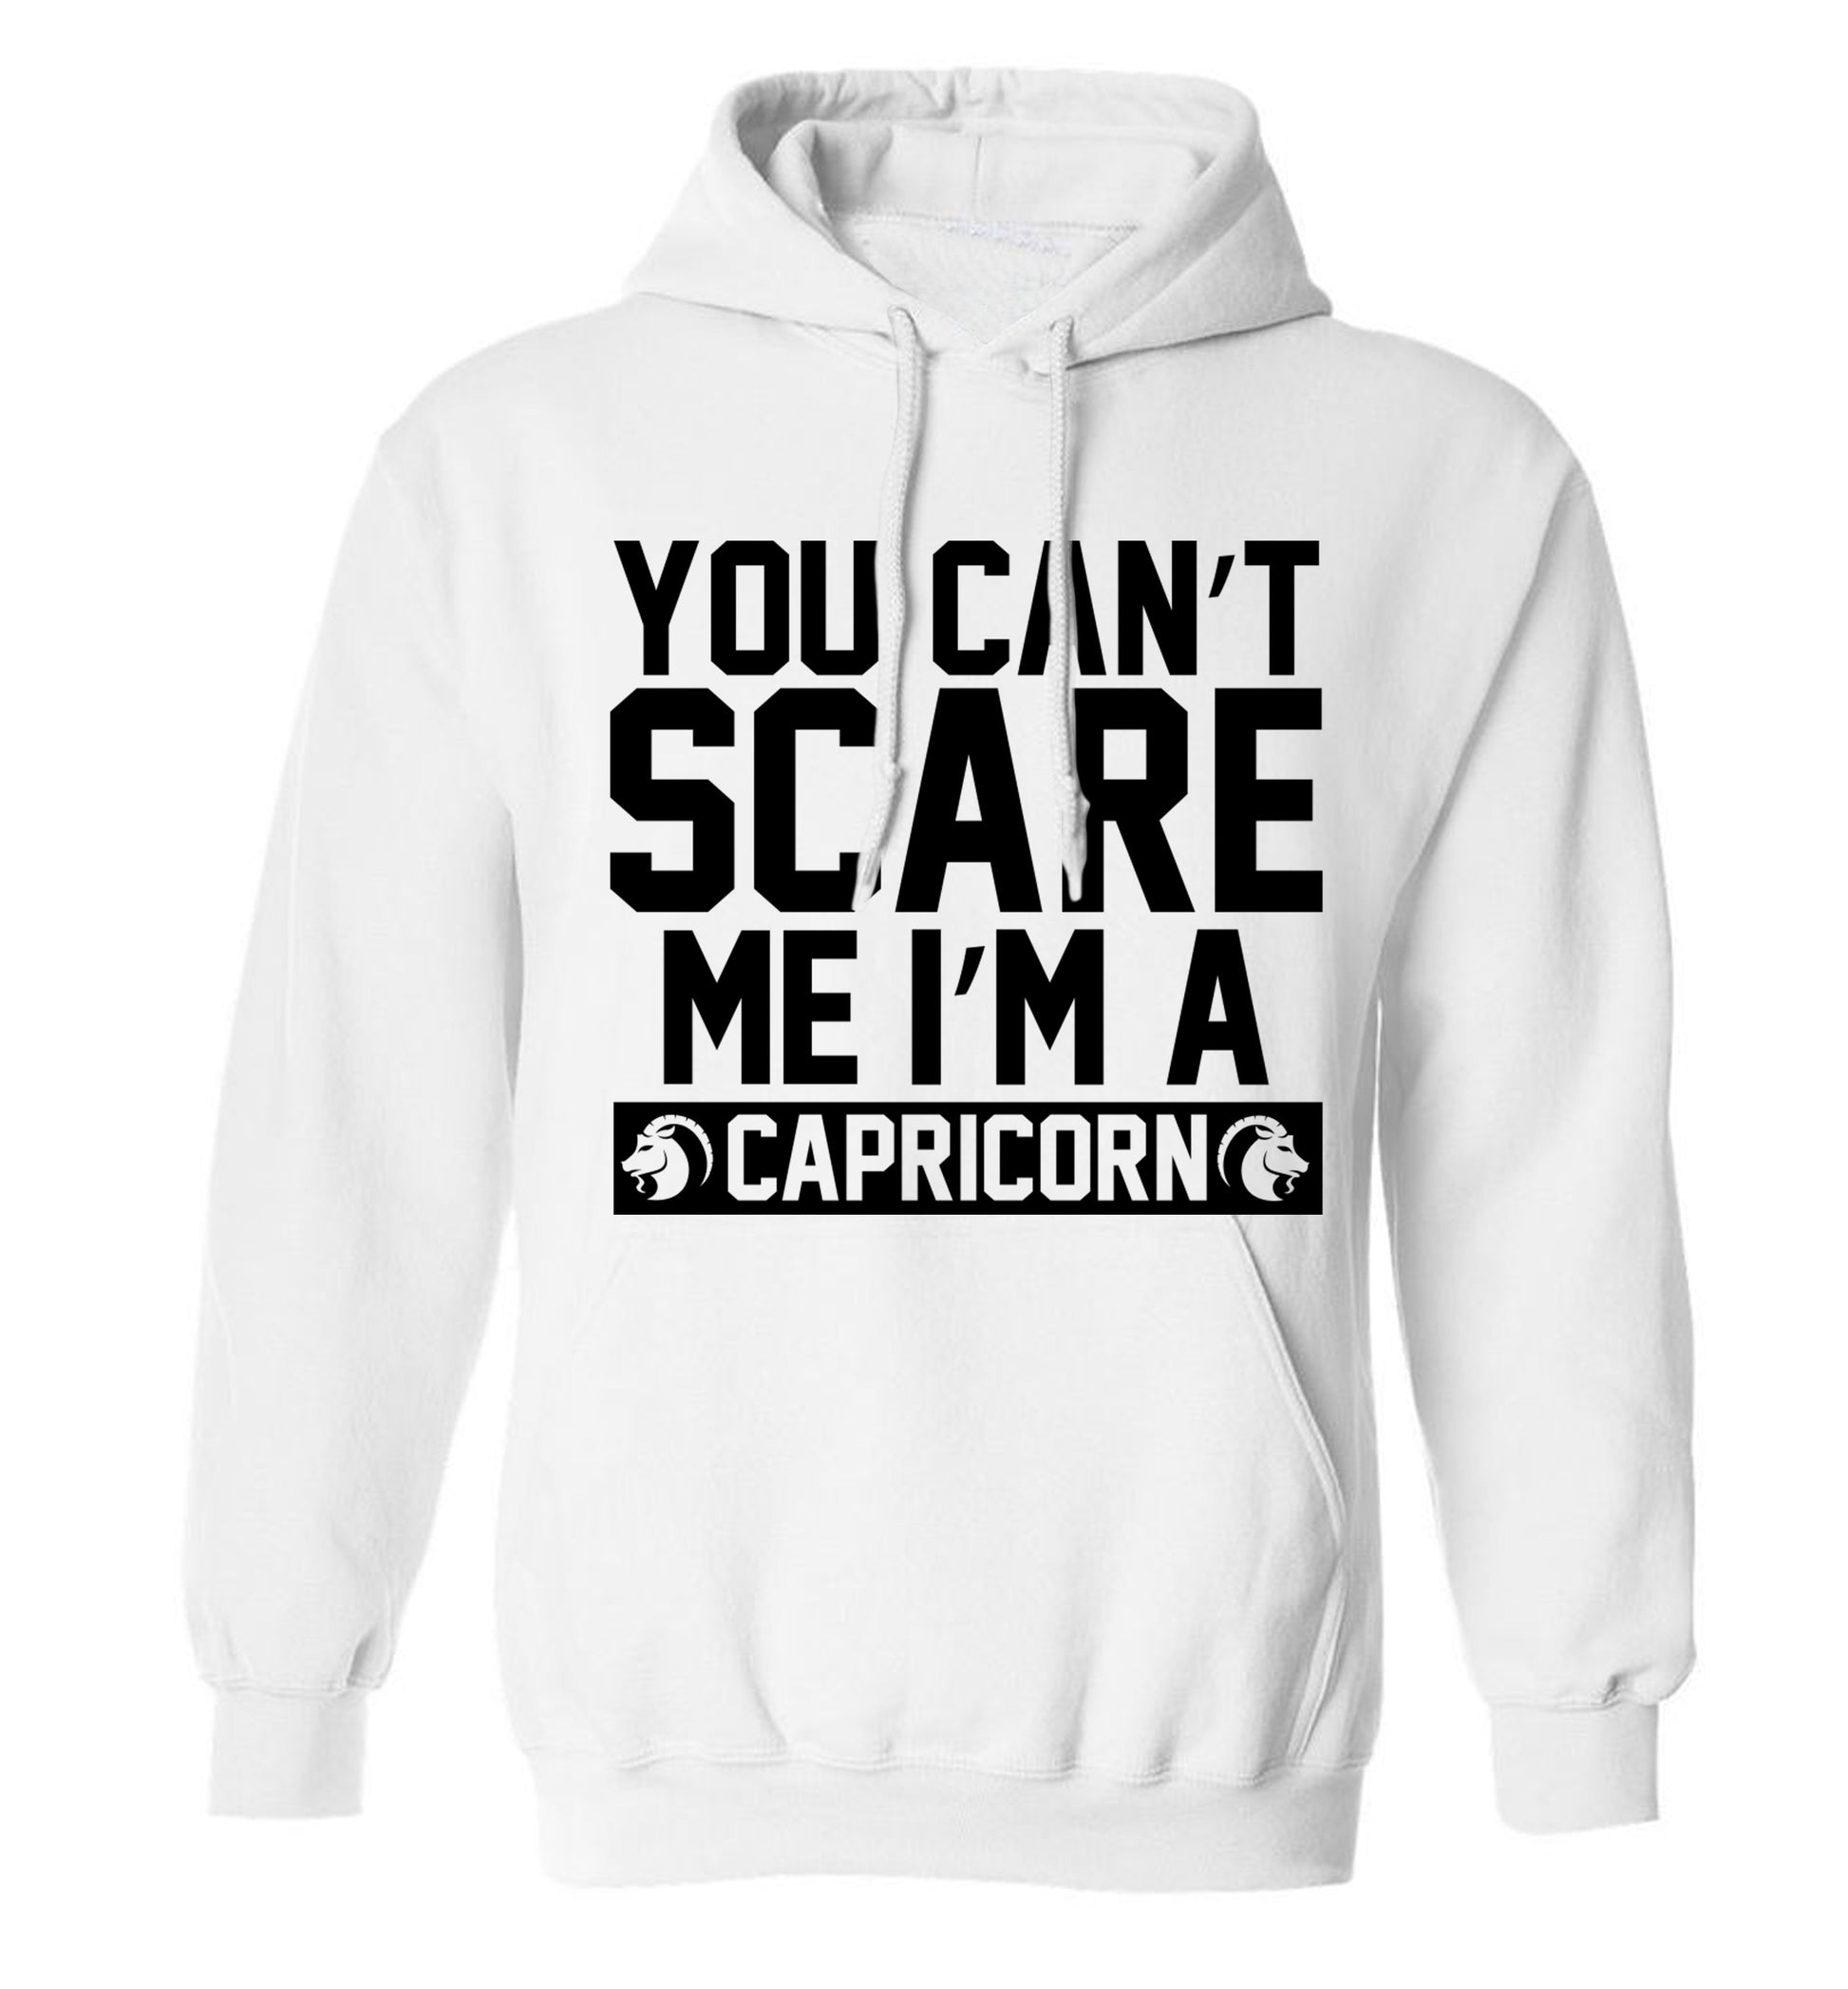 You can't scare me I'm a capricorn adults unisex white hoodie 2XL